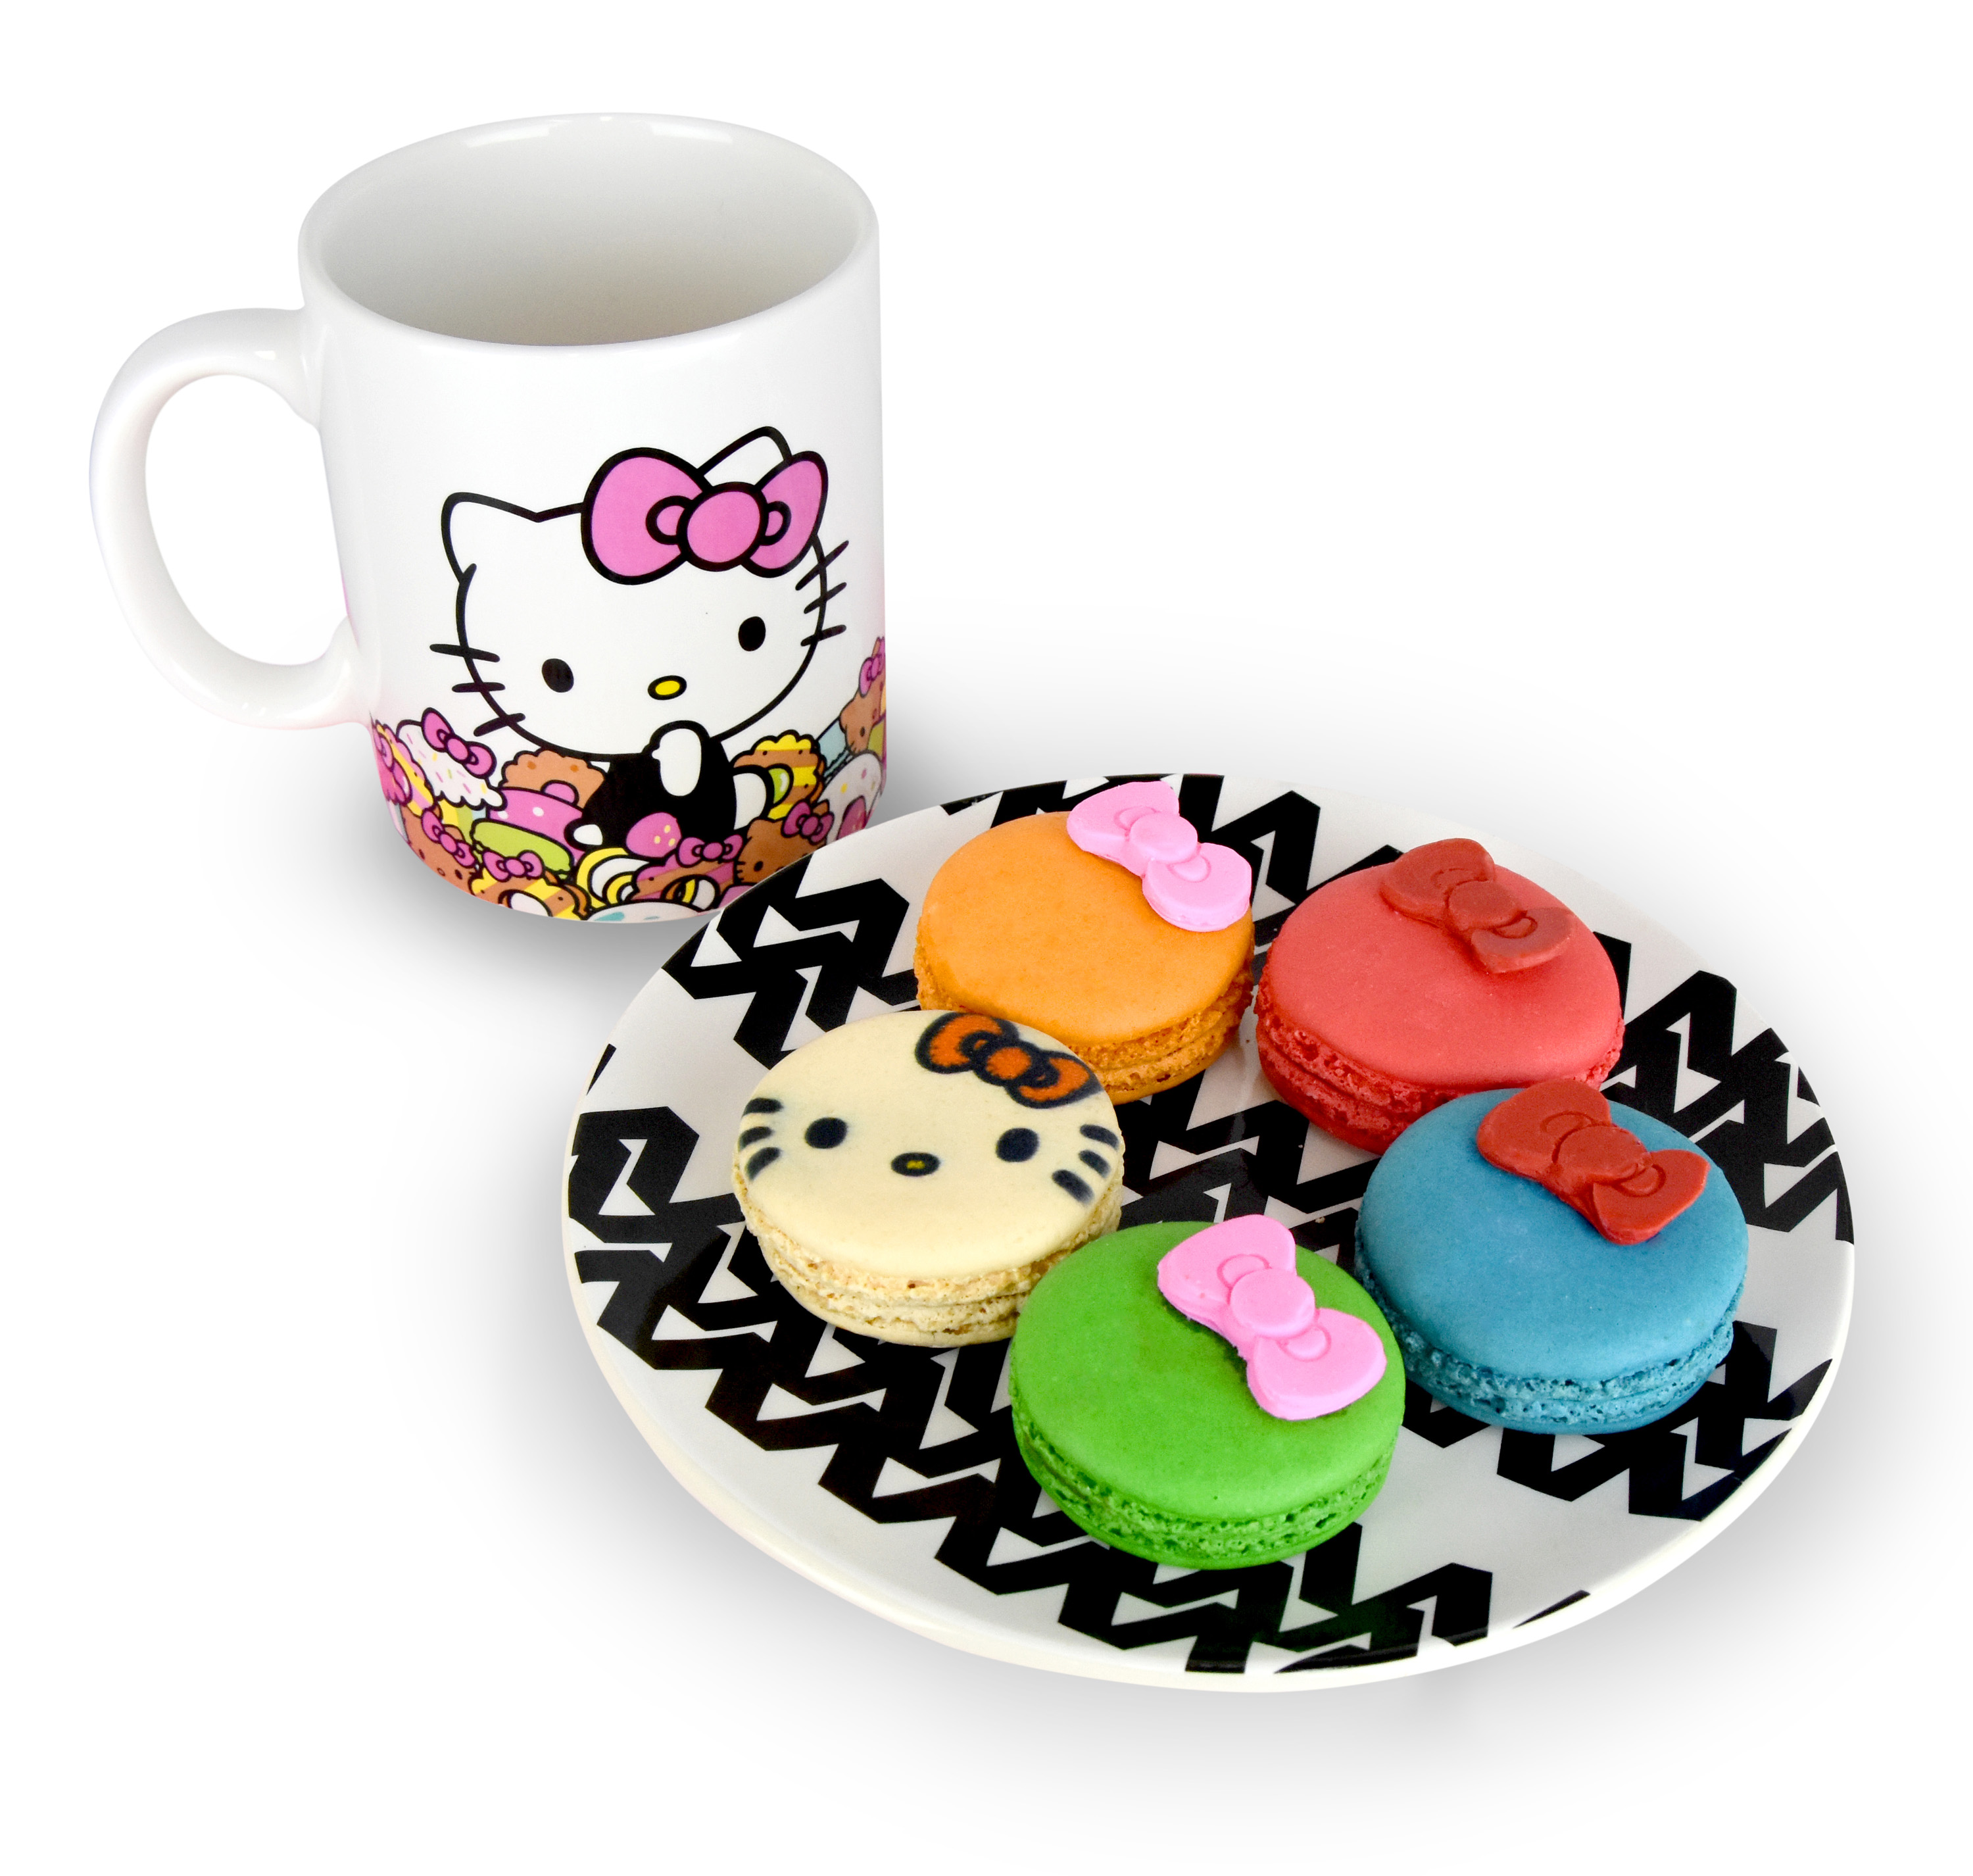 Hello Kitty Cafe truck will be at Florida Mall on Saturday, Oct. 29, Orlando